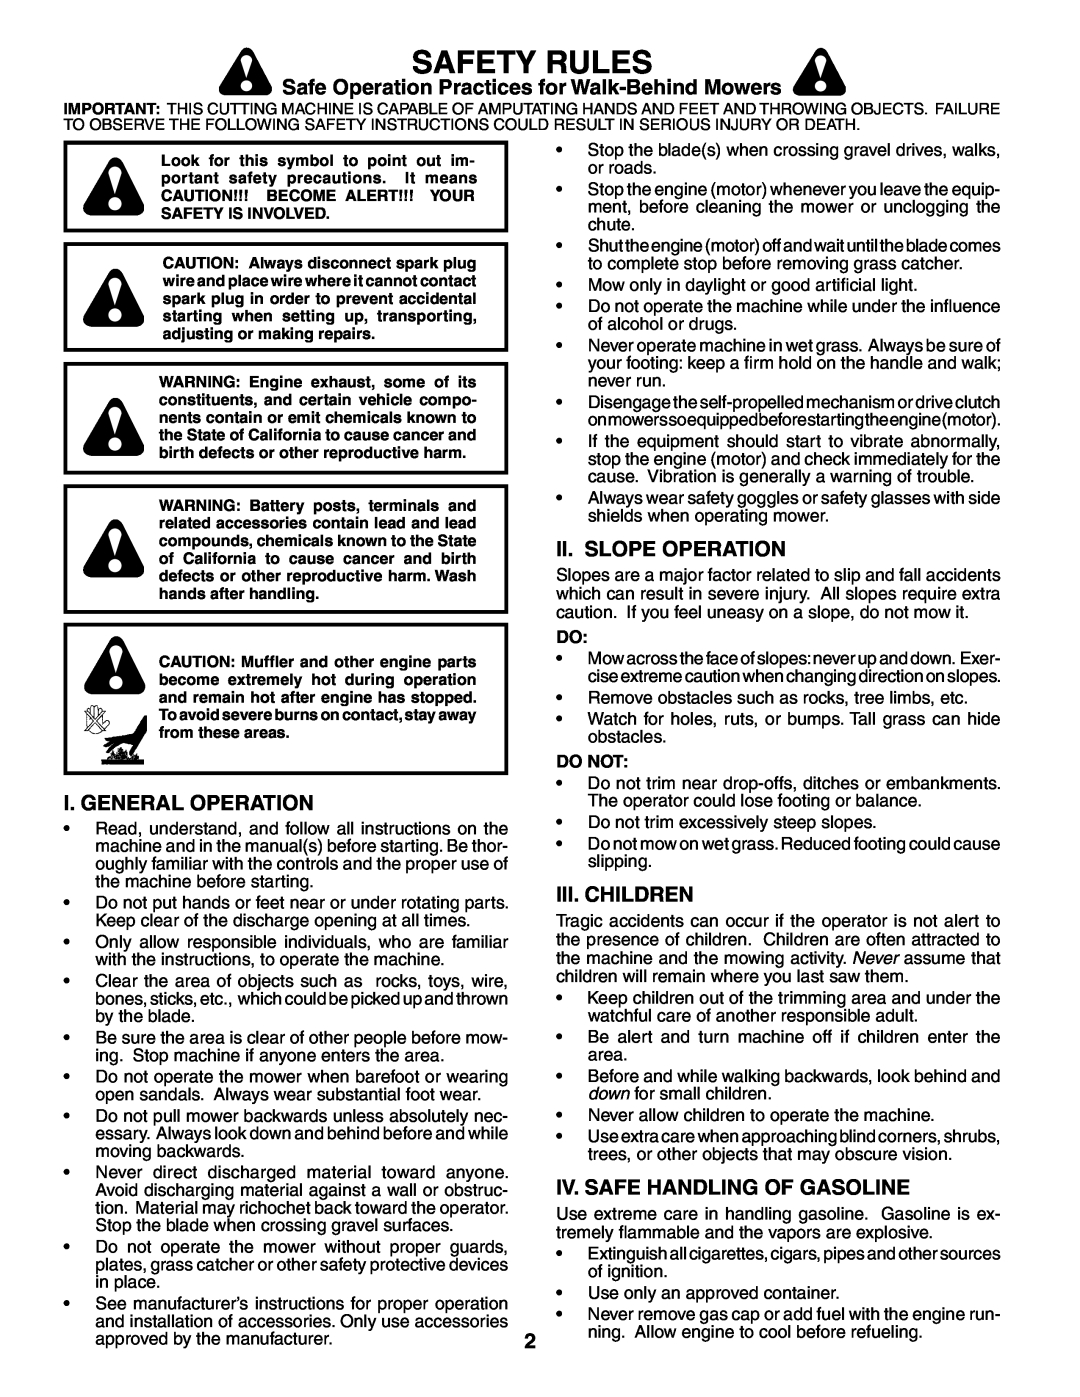 Husqvarna 917.37535 Safety Rules, Safe Operation Practices for Walk-Behind Mowers, Ii. Slope Operation, Iii. Children 